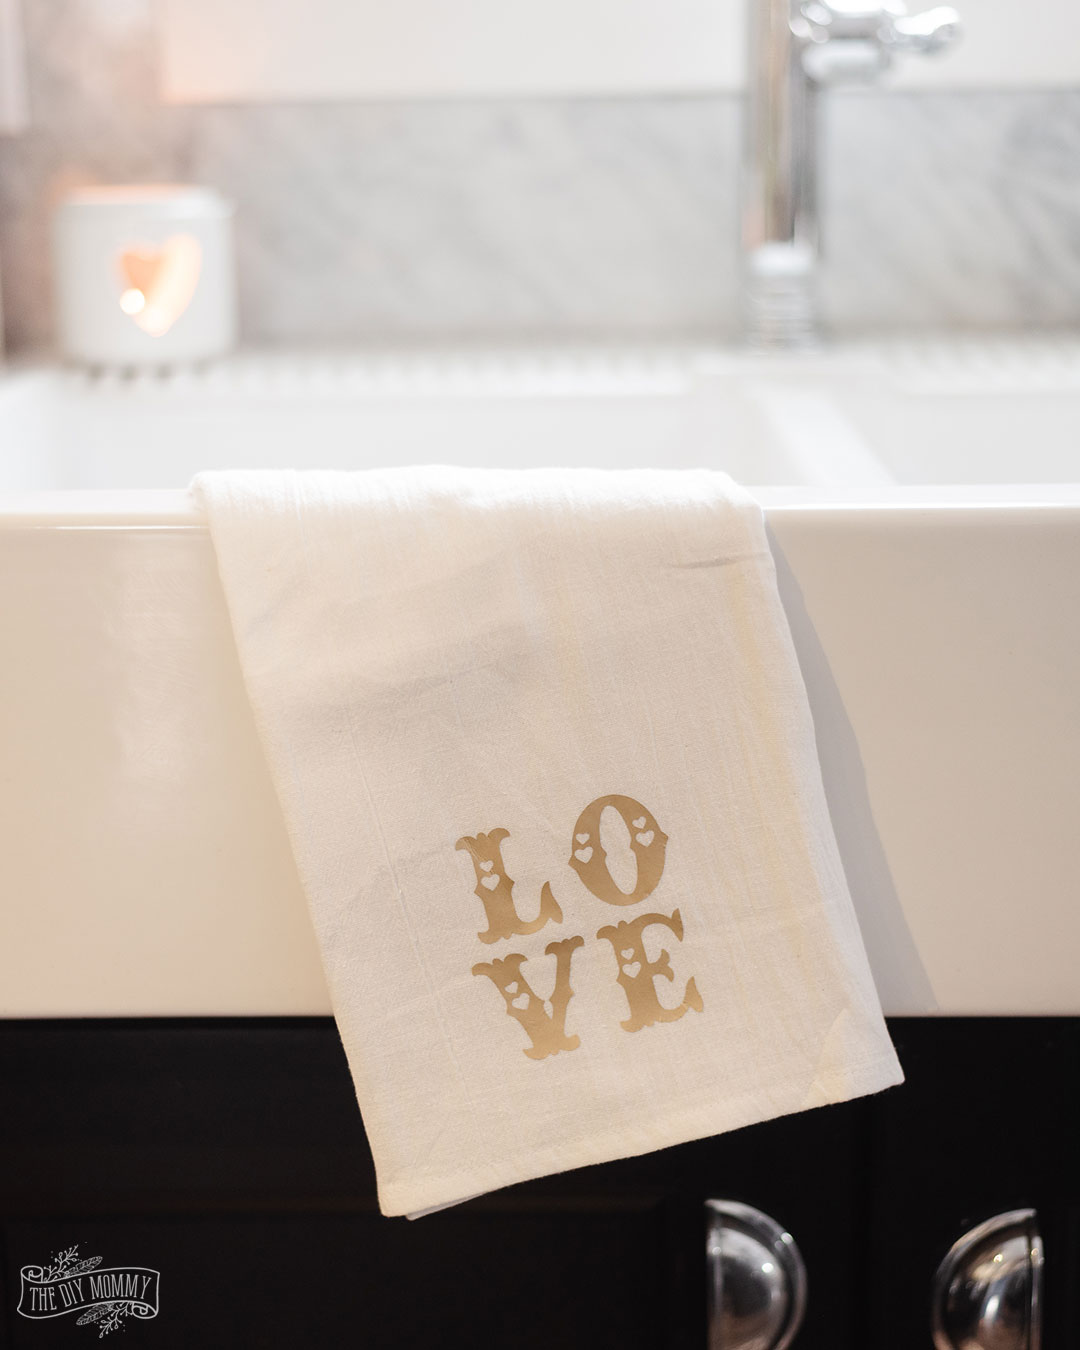 Learn how to create a simple DIY "LOVE" tea towel and get easy, neutral Valentine's Day decorating ideas for the kitchen